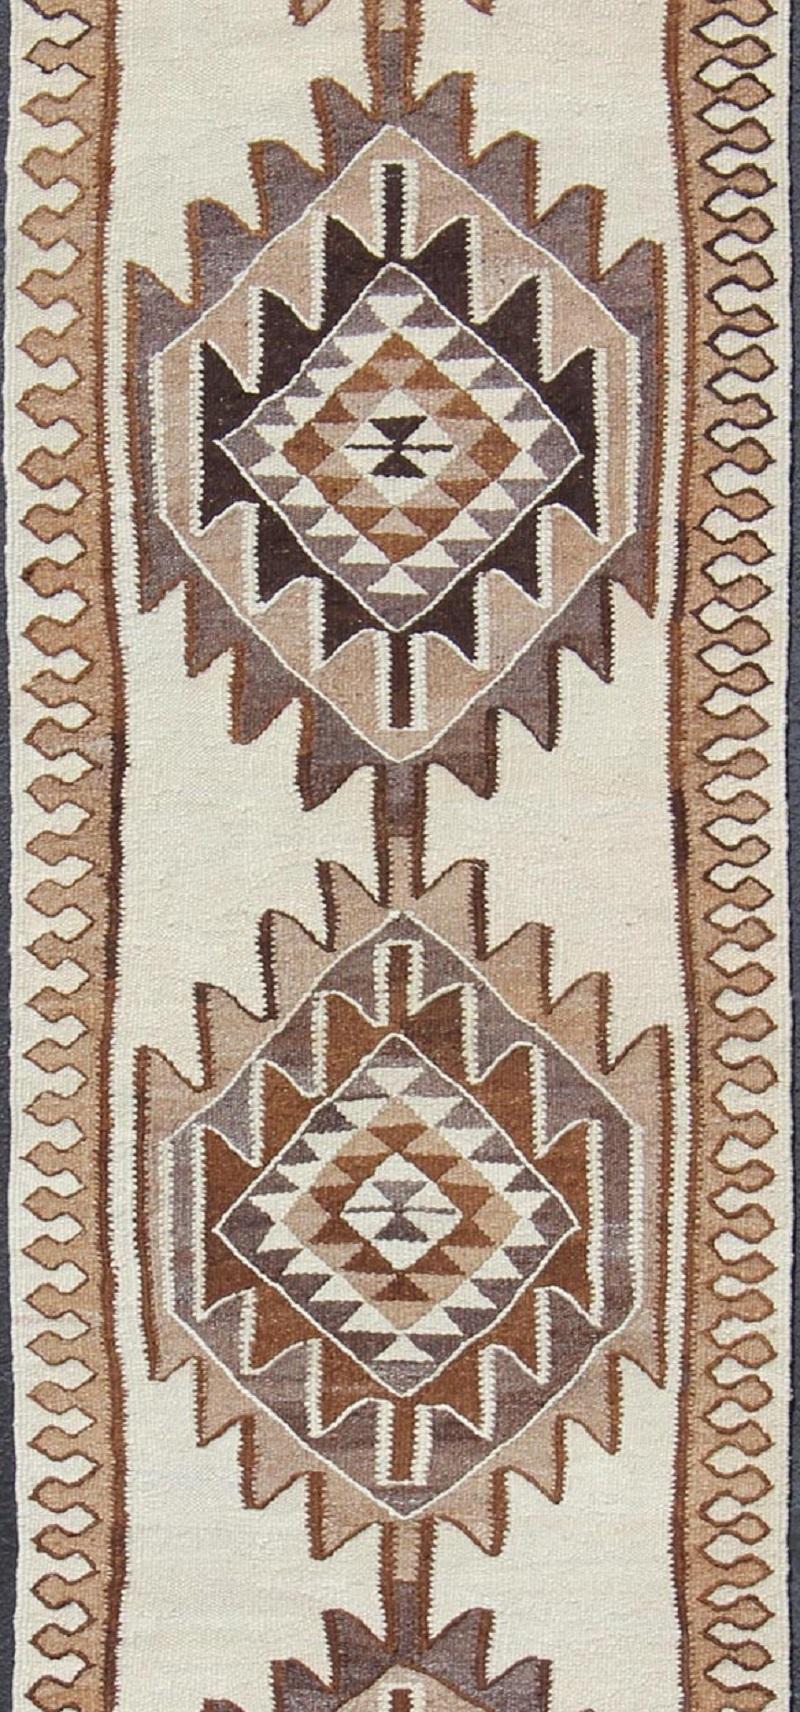 Hand-Woven Vintage Turkish Kilim Runner with Tribal Medallions in Shades of Brown and Cream For Sale